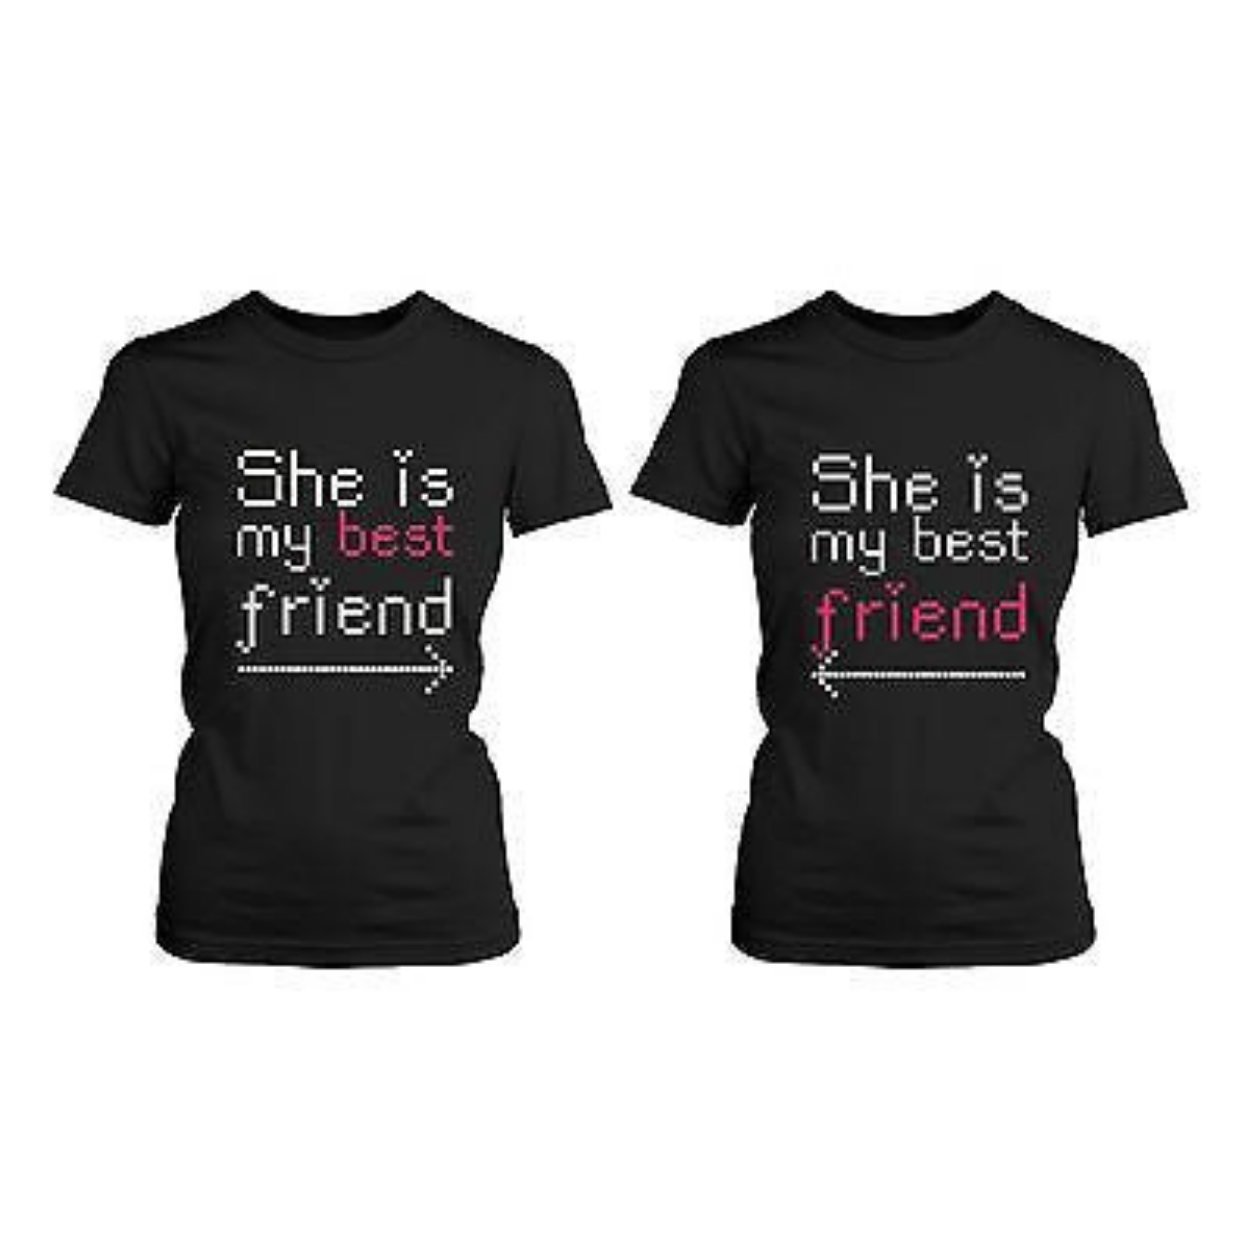 Bff Matching Shirts - She'S My Best Friend With Arrows - Gift For Bff - 365 In Love